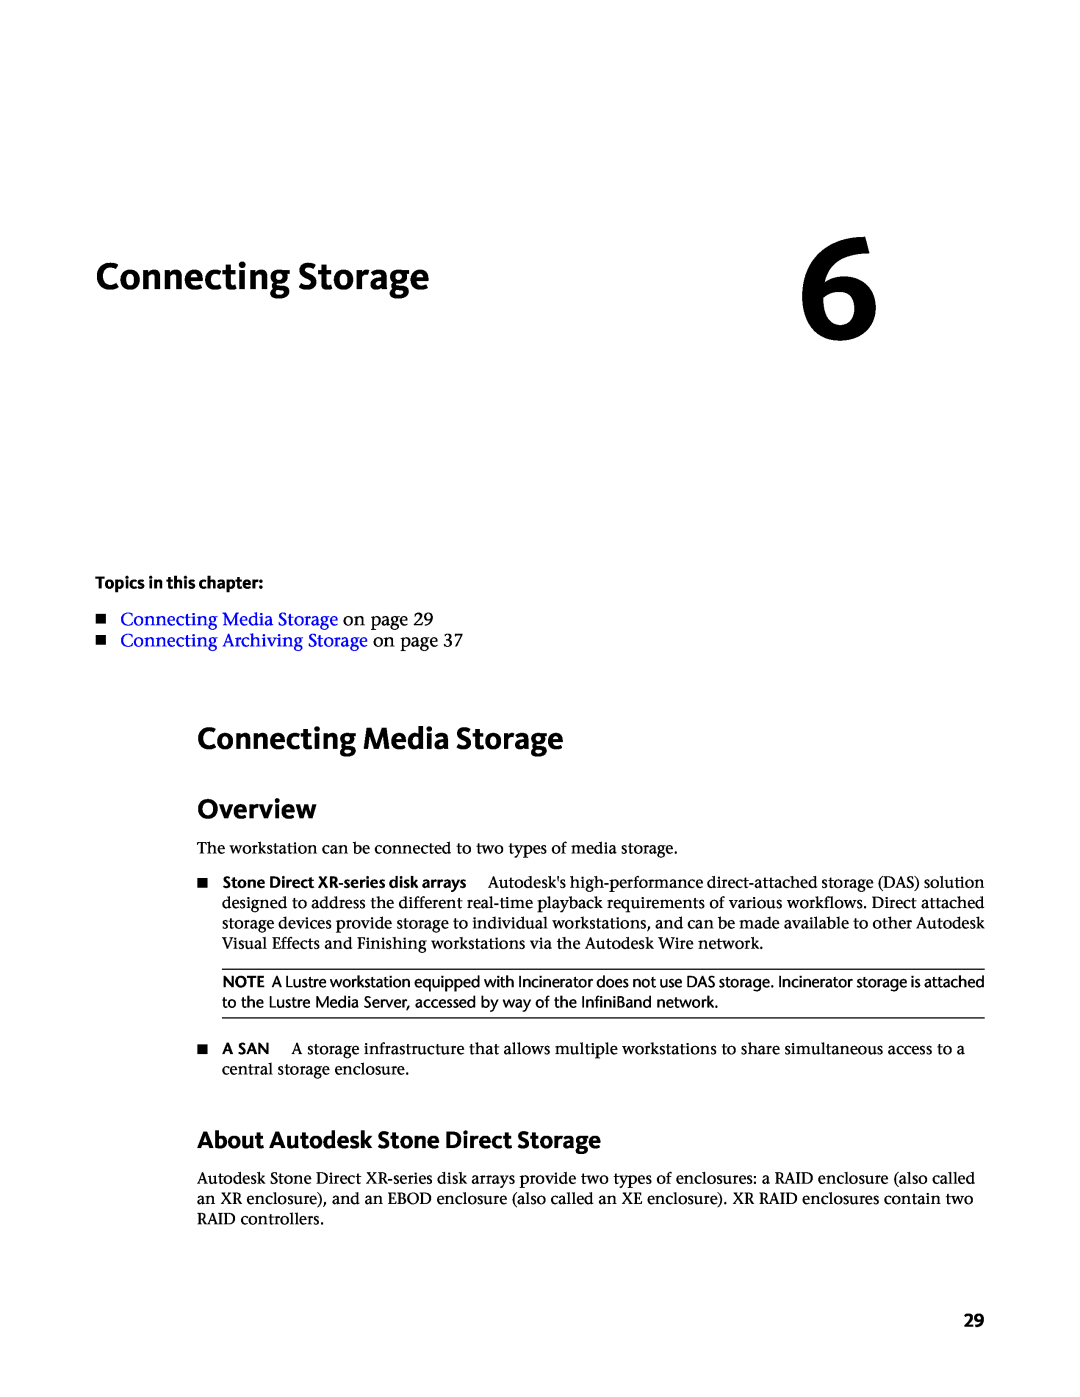 HP Z800 manual Connecting Storage, Connecting Media Storage, Overview, About Autodesk Stone Direct Storage 